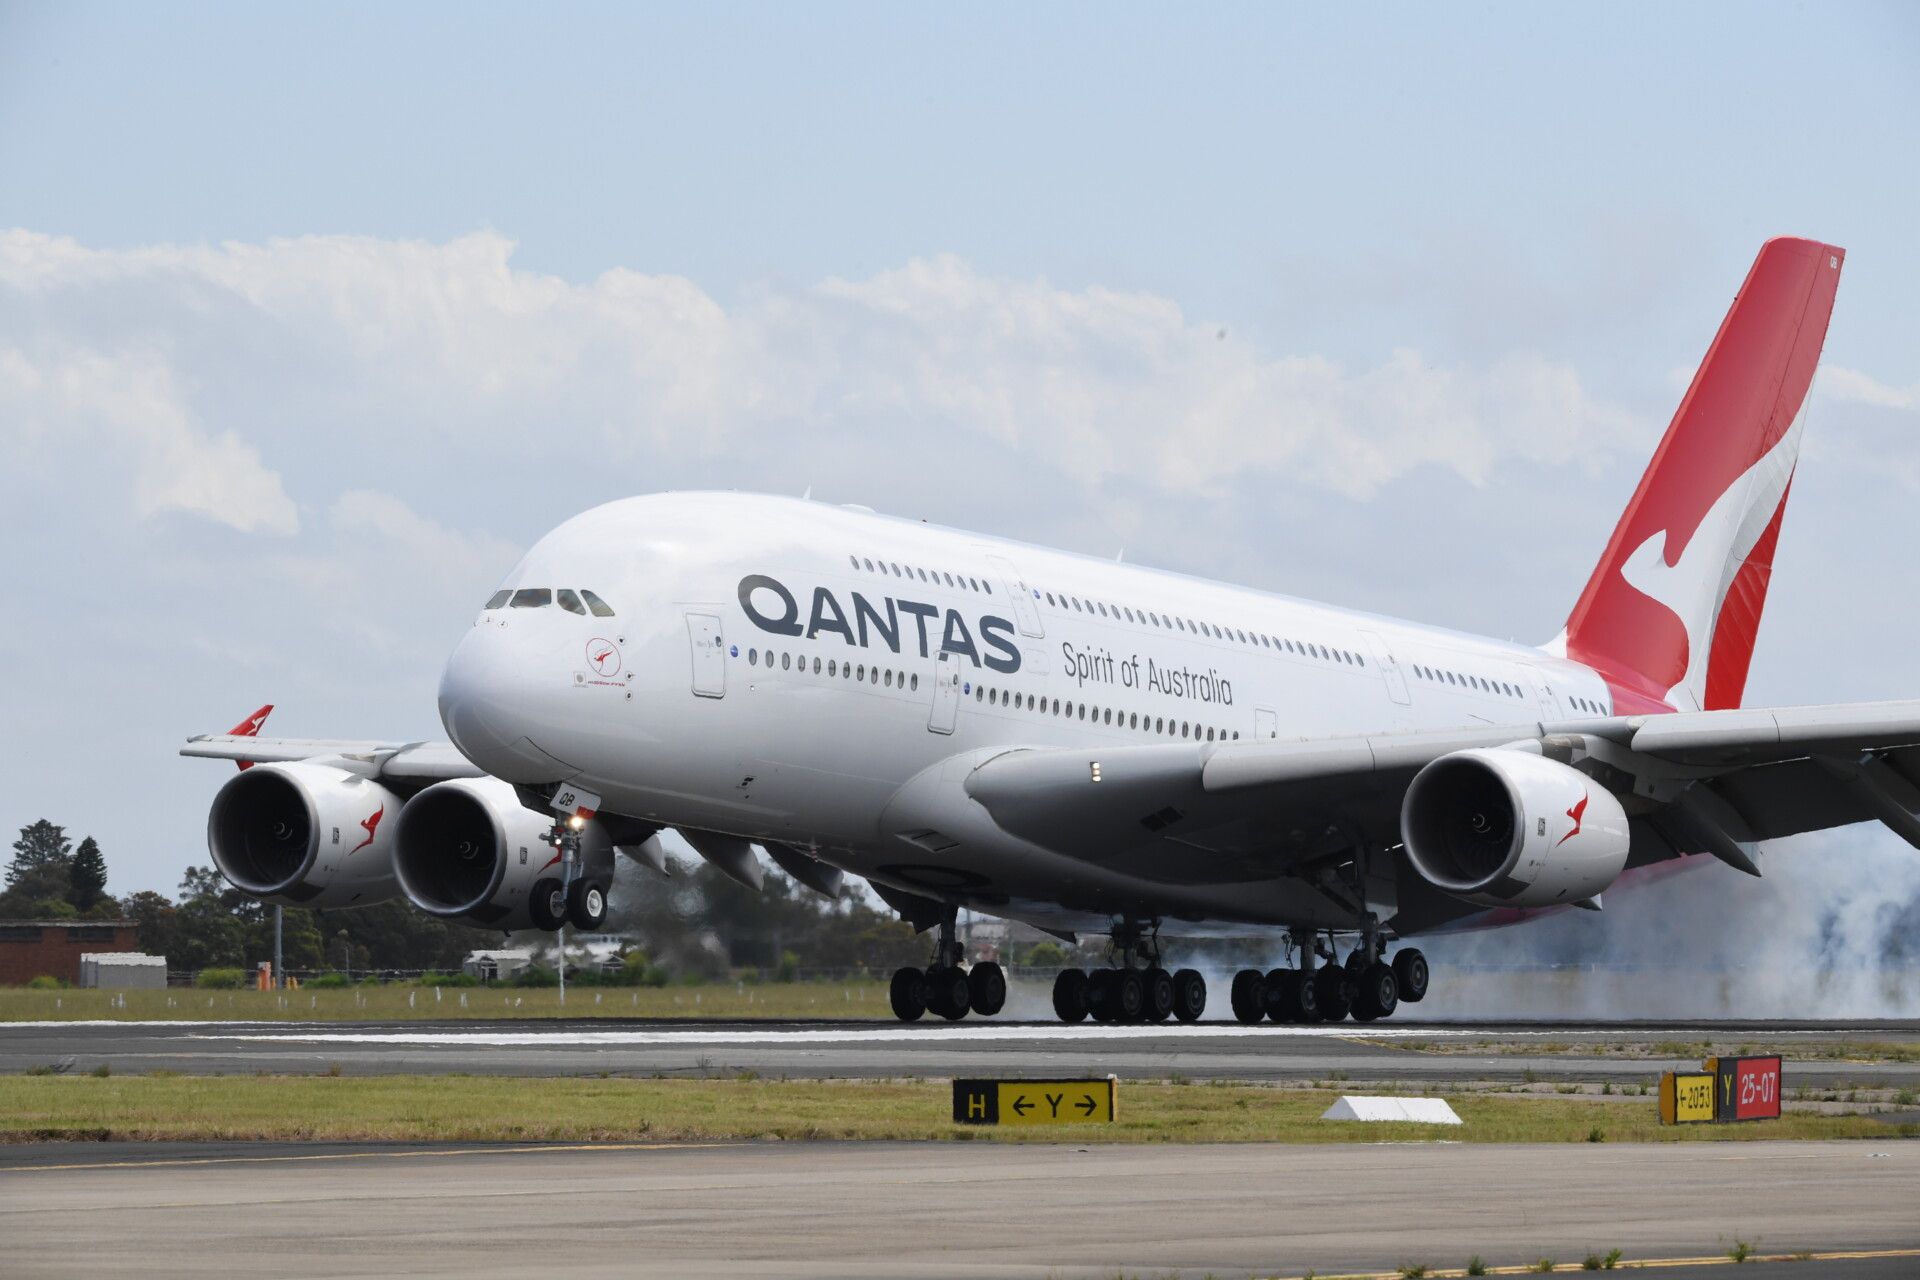 Qantas A380 have even featured as points planes